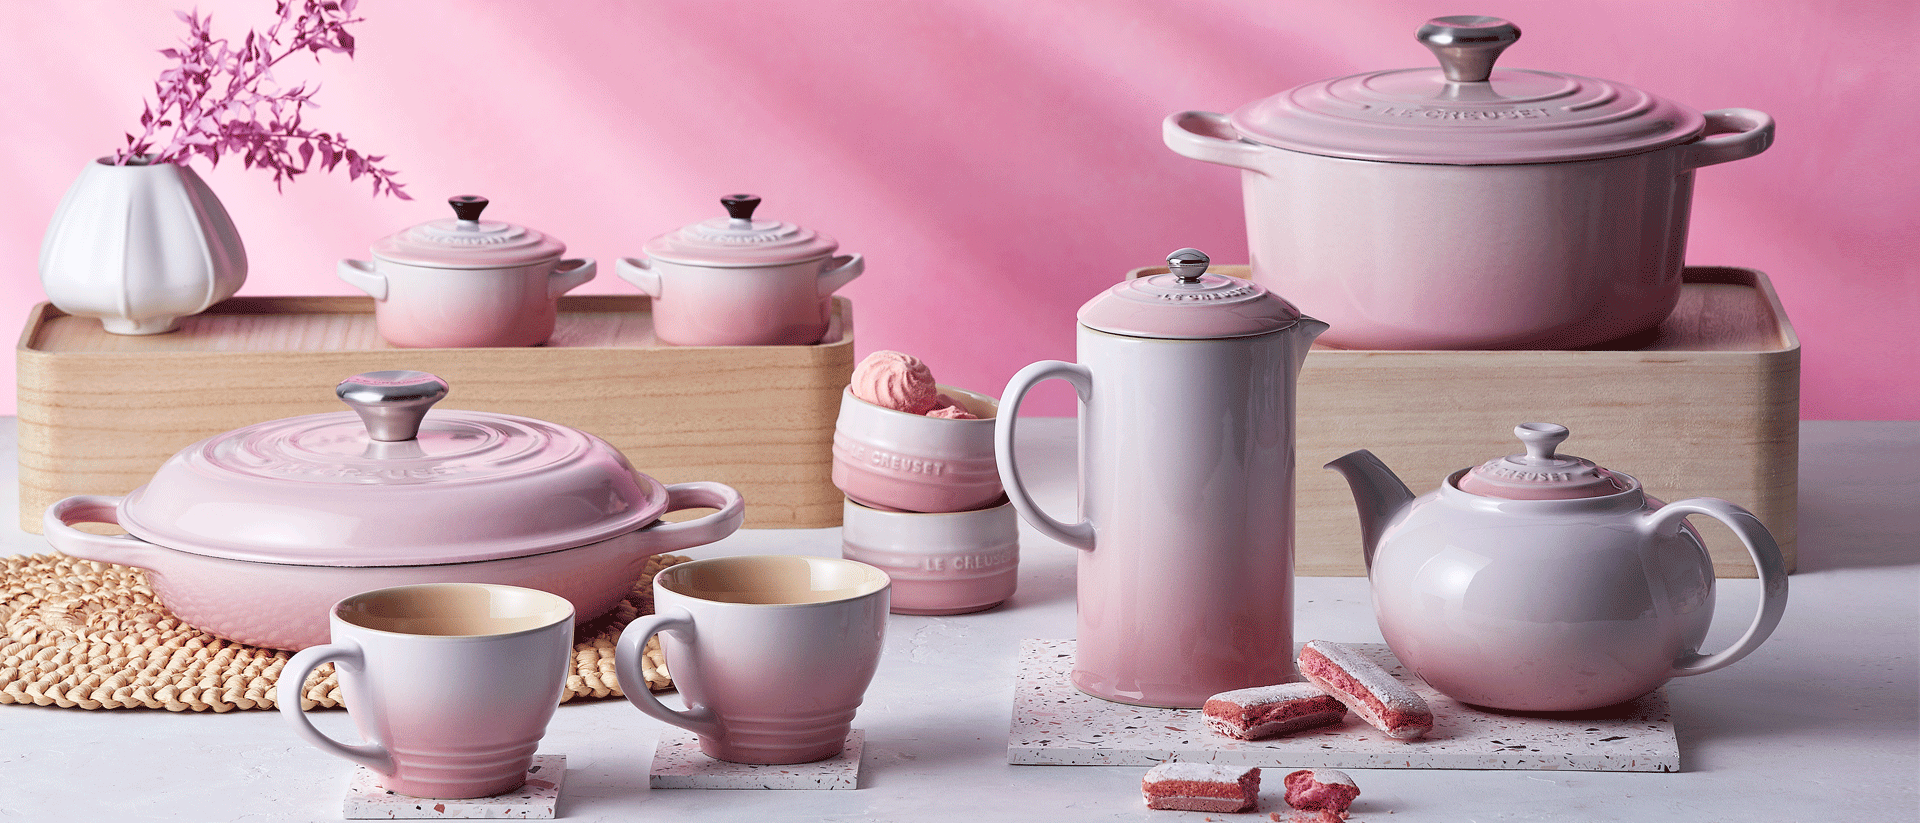 https://www.lecreuset.com.au/on/demandware.static/-/Sites-LCAU-Library/default/dw073a328a/images/Shop%20by%20Colour%20-%20Shell%20Pink/shell%20pink_horizontal.png